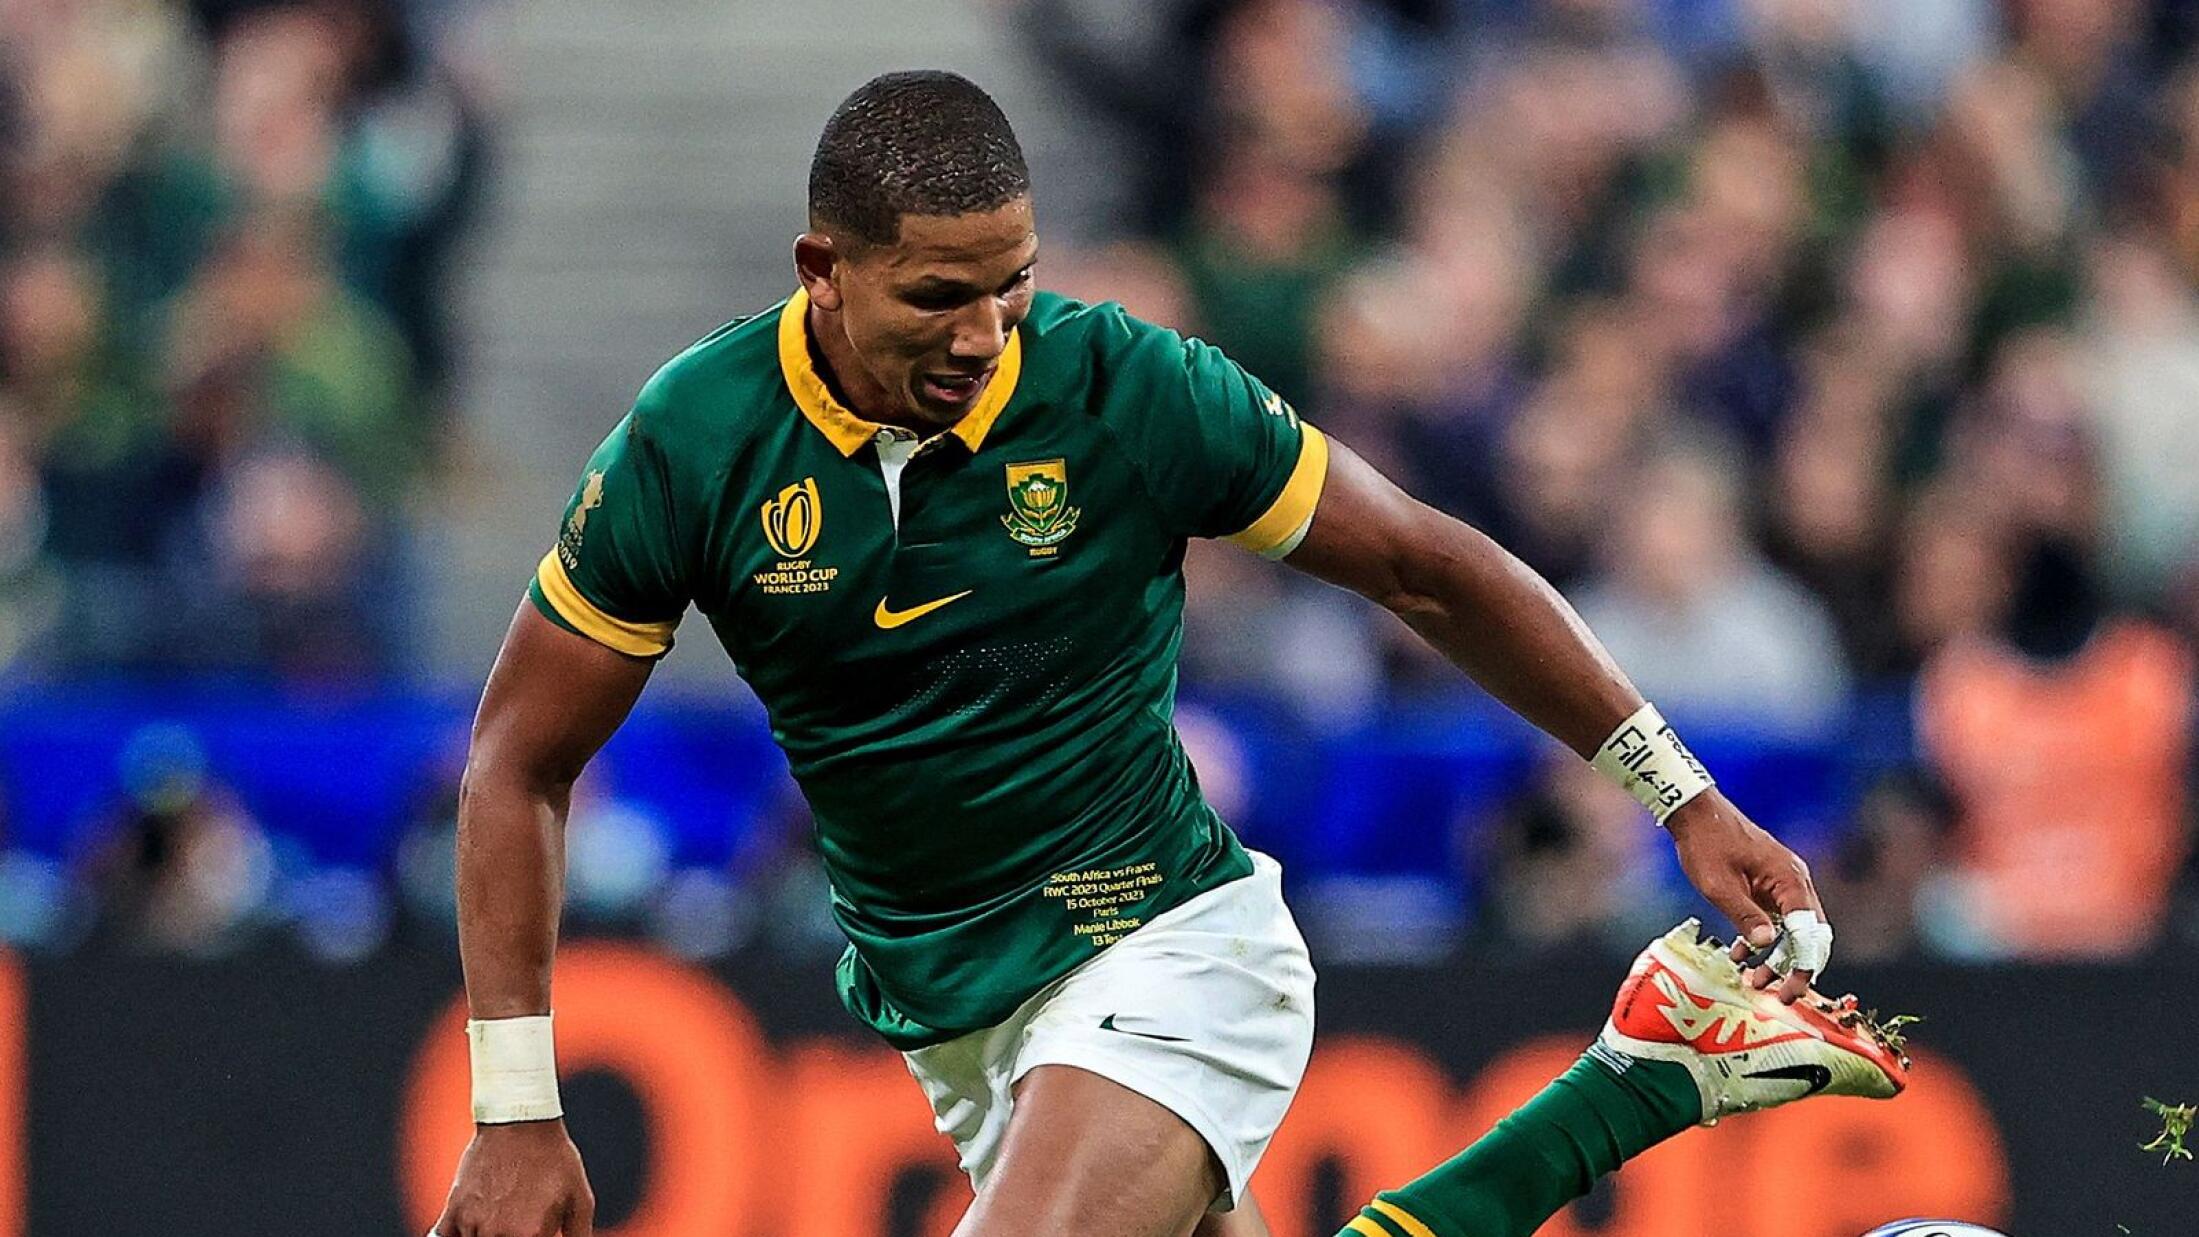 South Africa’s Manie Libbok in action during the Rugby World Cup